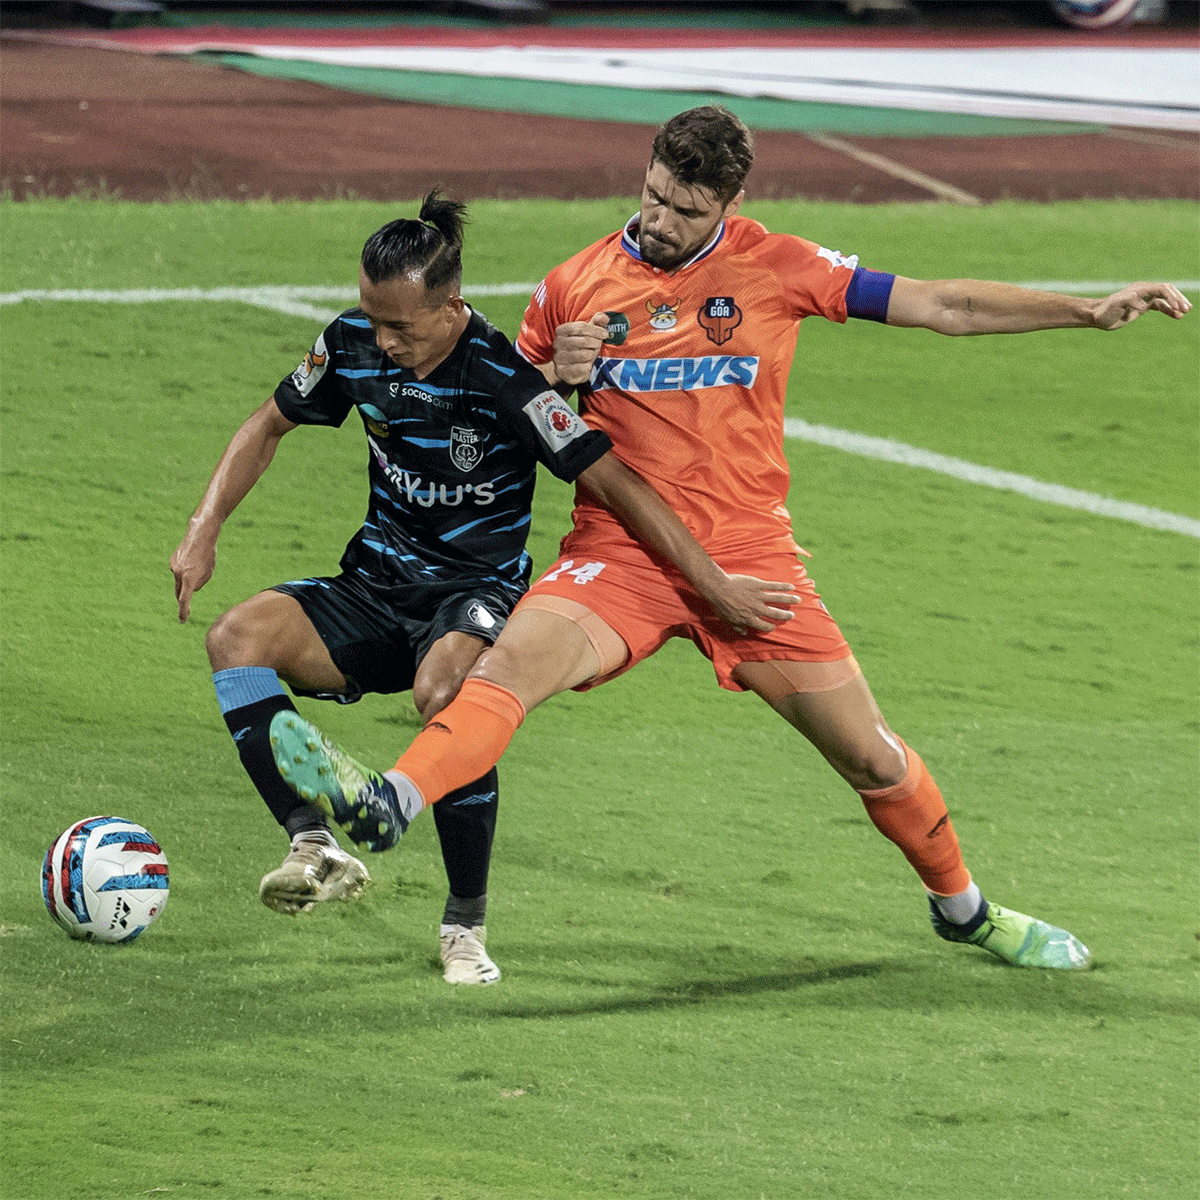 Action from the Indian Super League match played between FC Goa and Kerala Blasters in Bambolim, Goa, on Sunday